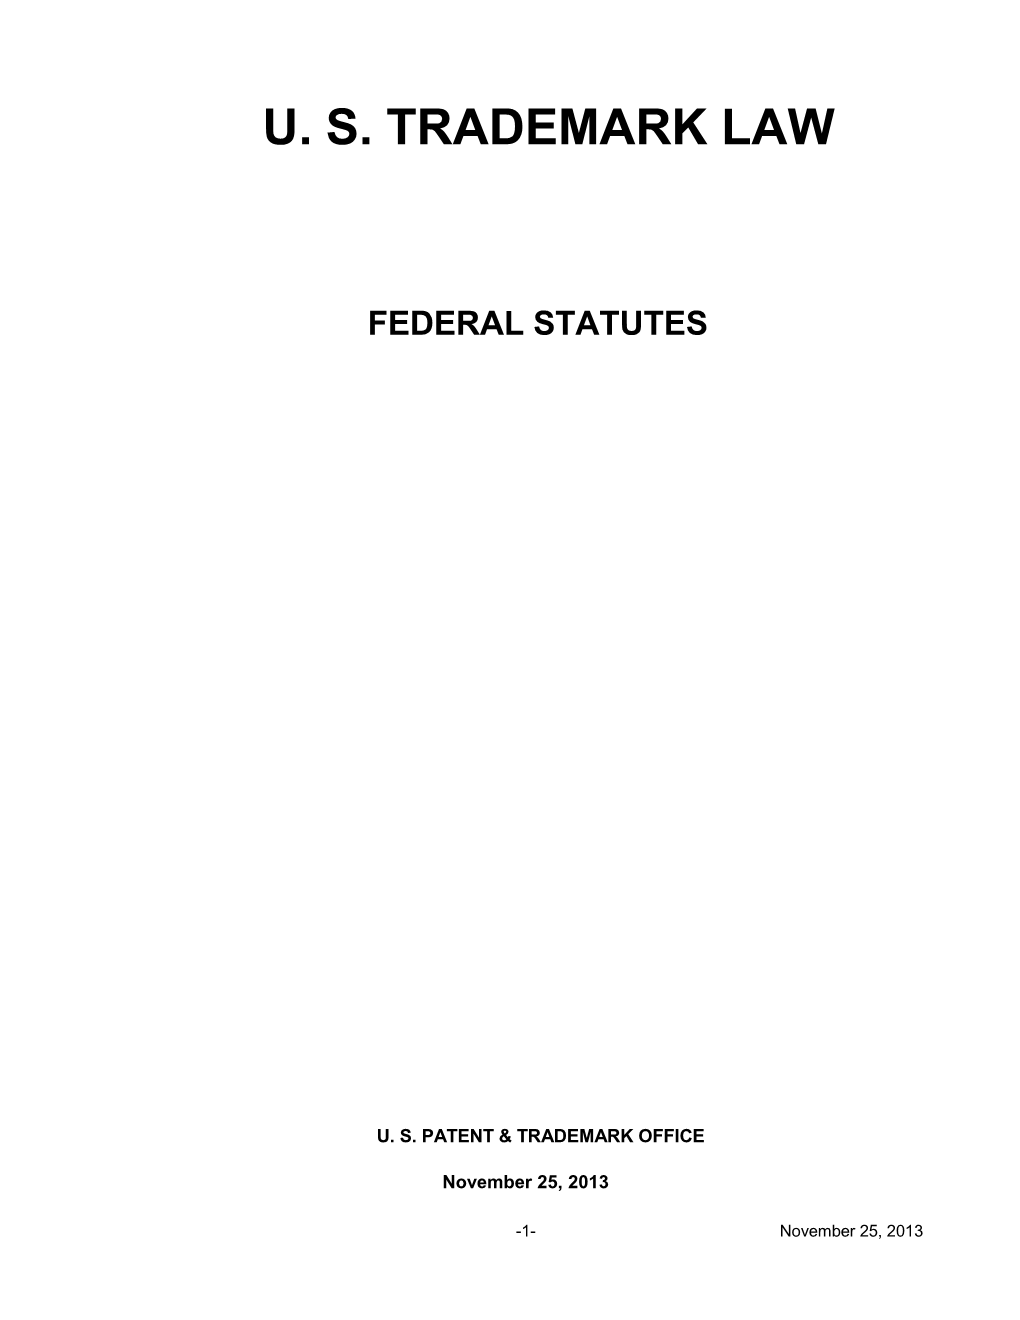 Trademark Rules and Statutes